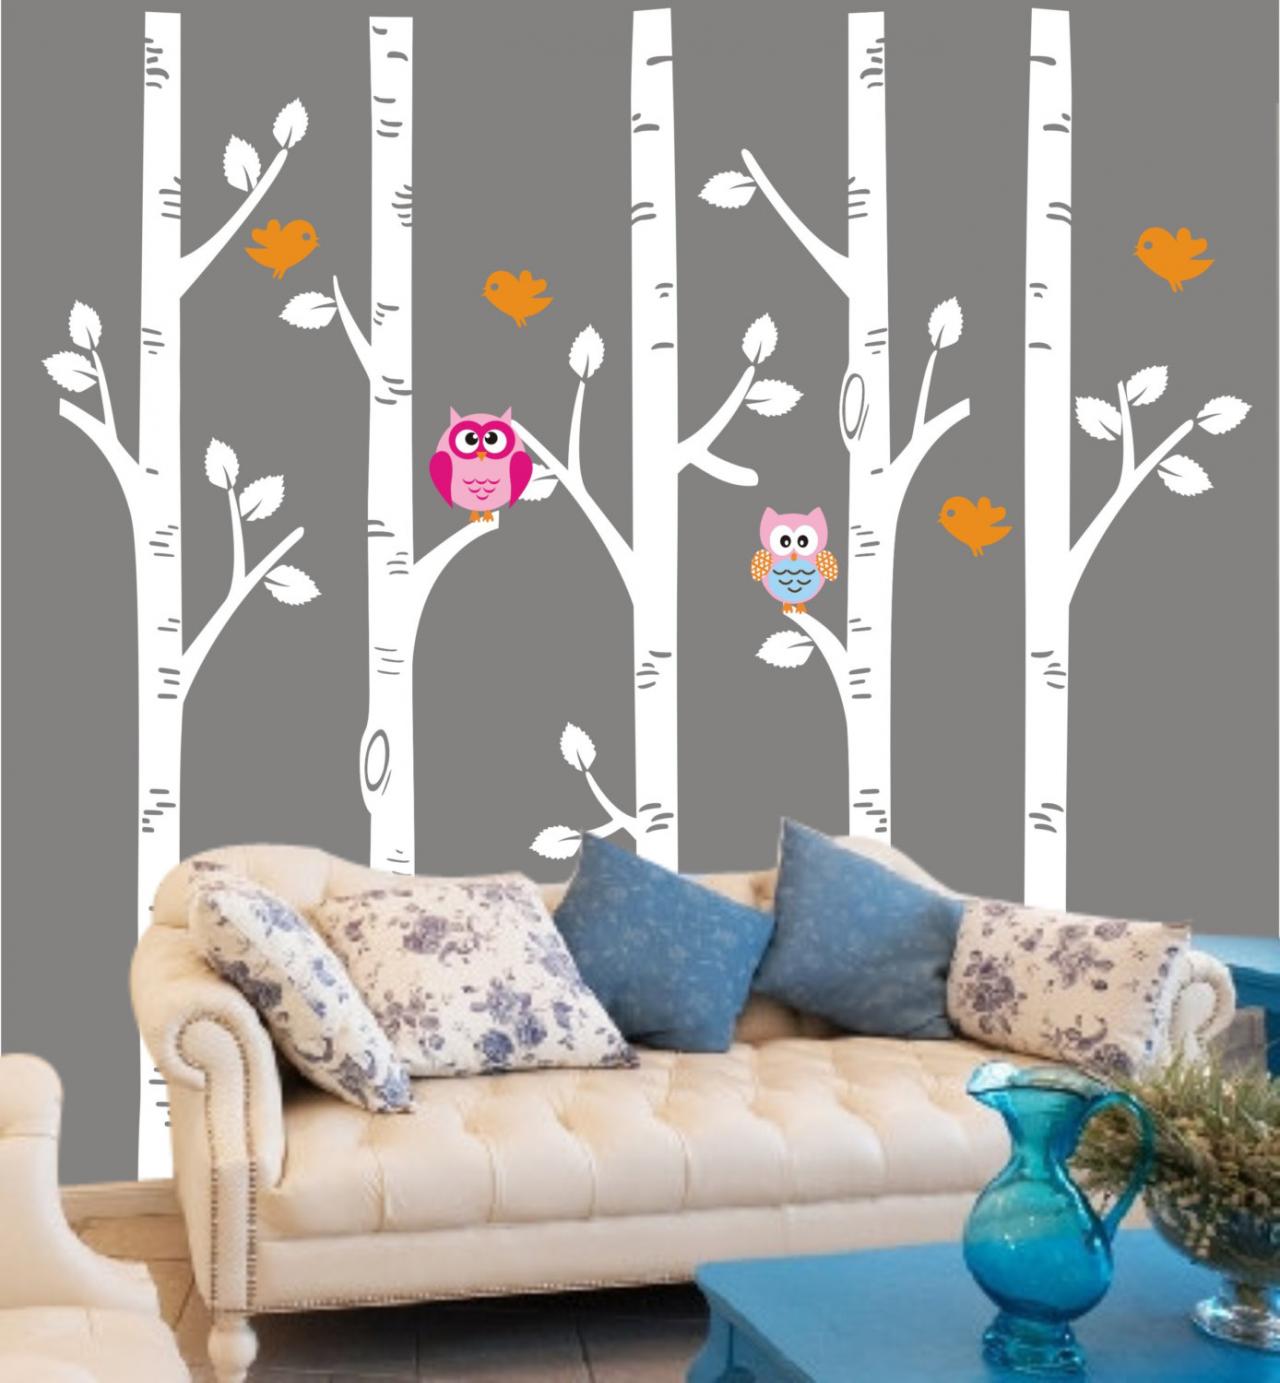 Vinyl Wall Decal Colorful Owl Cute Birds On Tree Bird Leaf Owls Trees Home House Art Wall Decals Wall Sticker Stickers Baby Room Kid R833